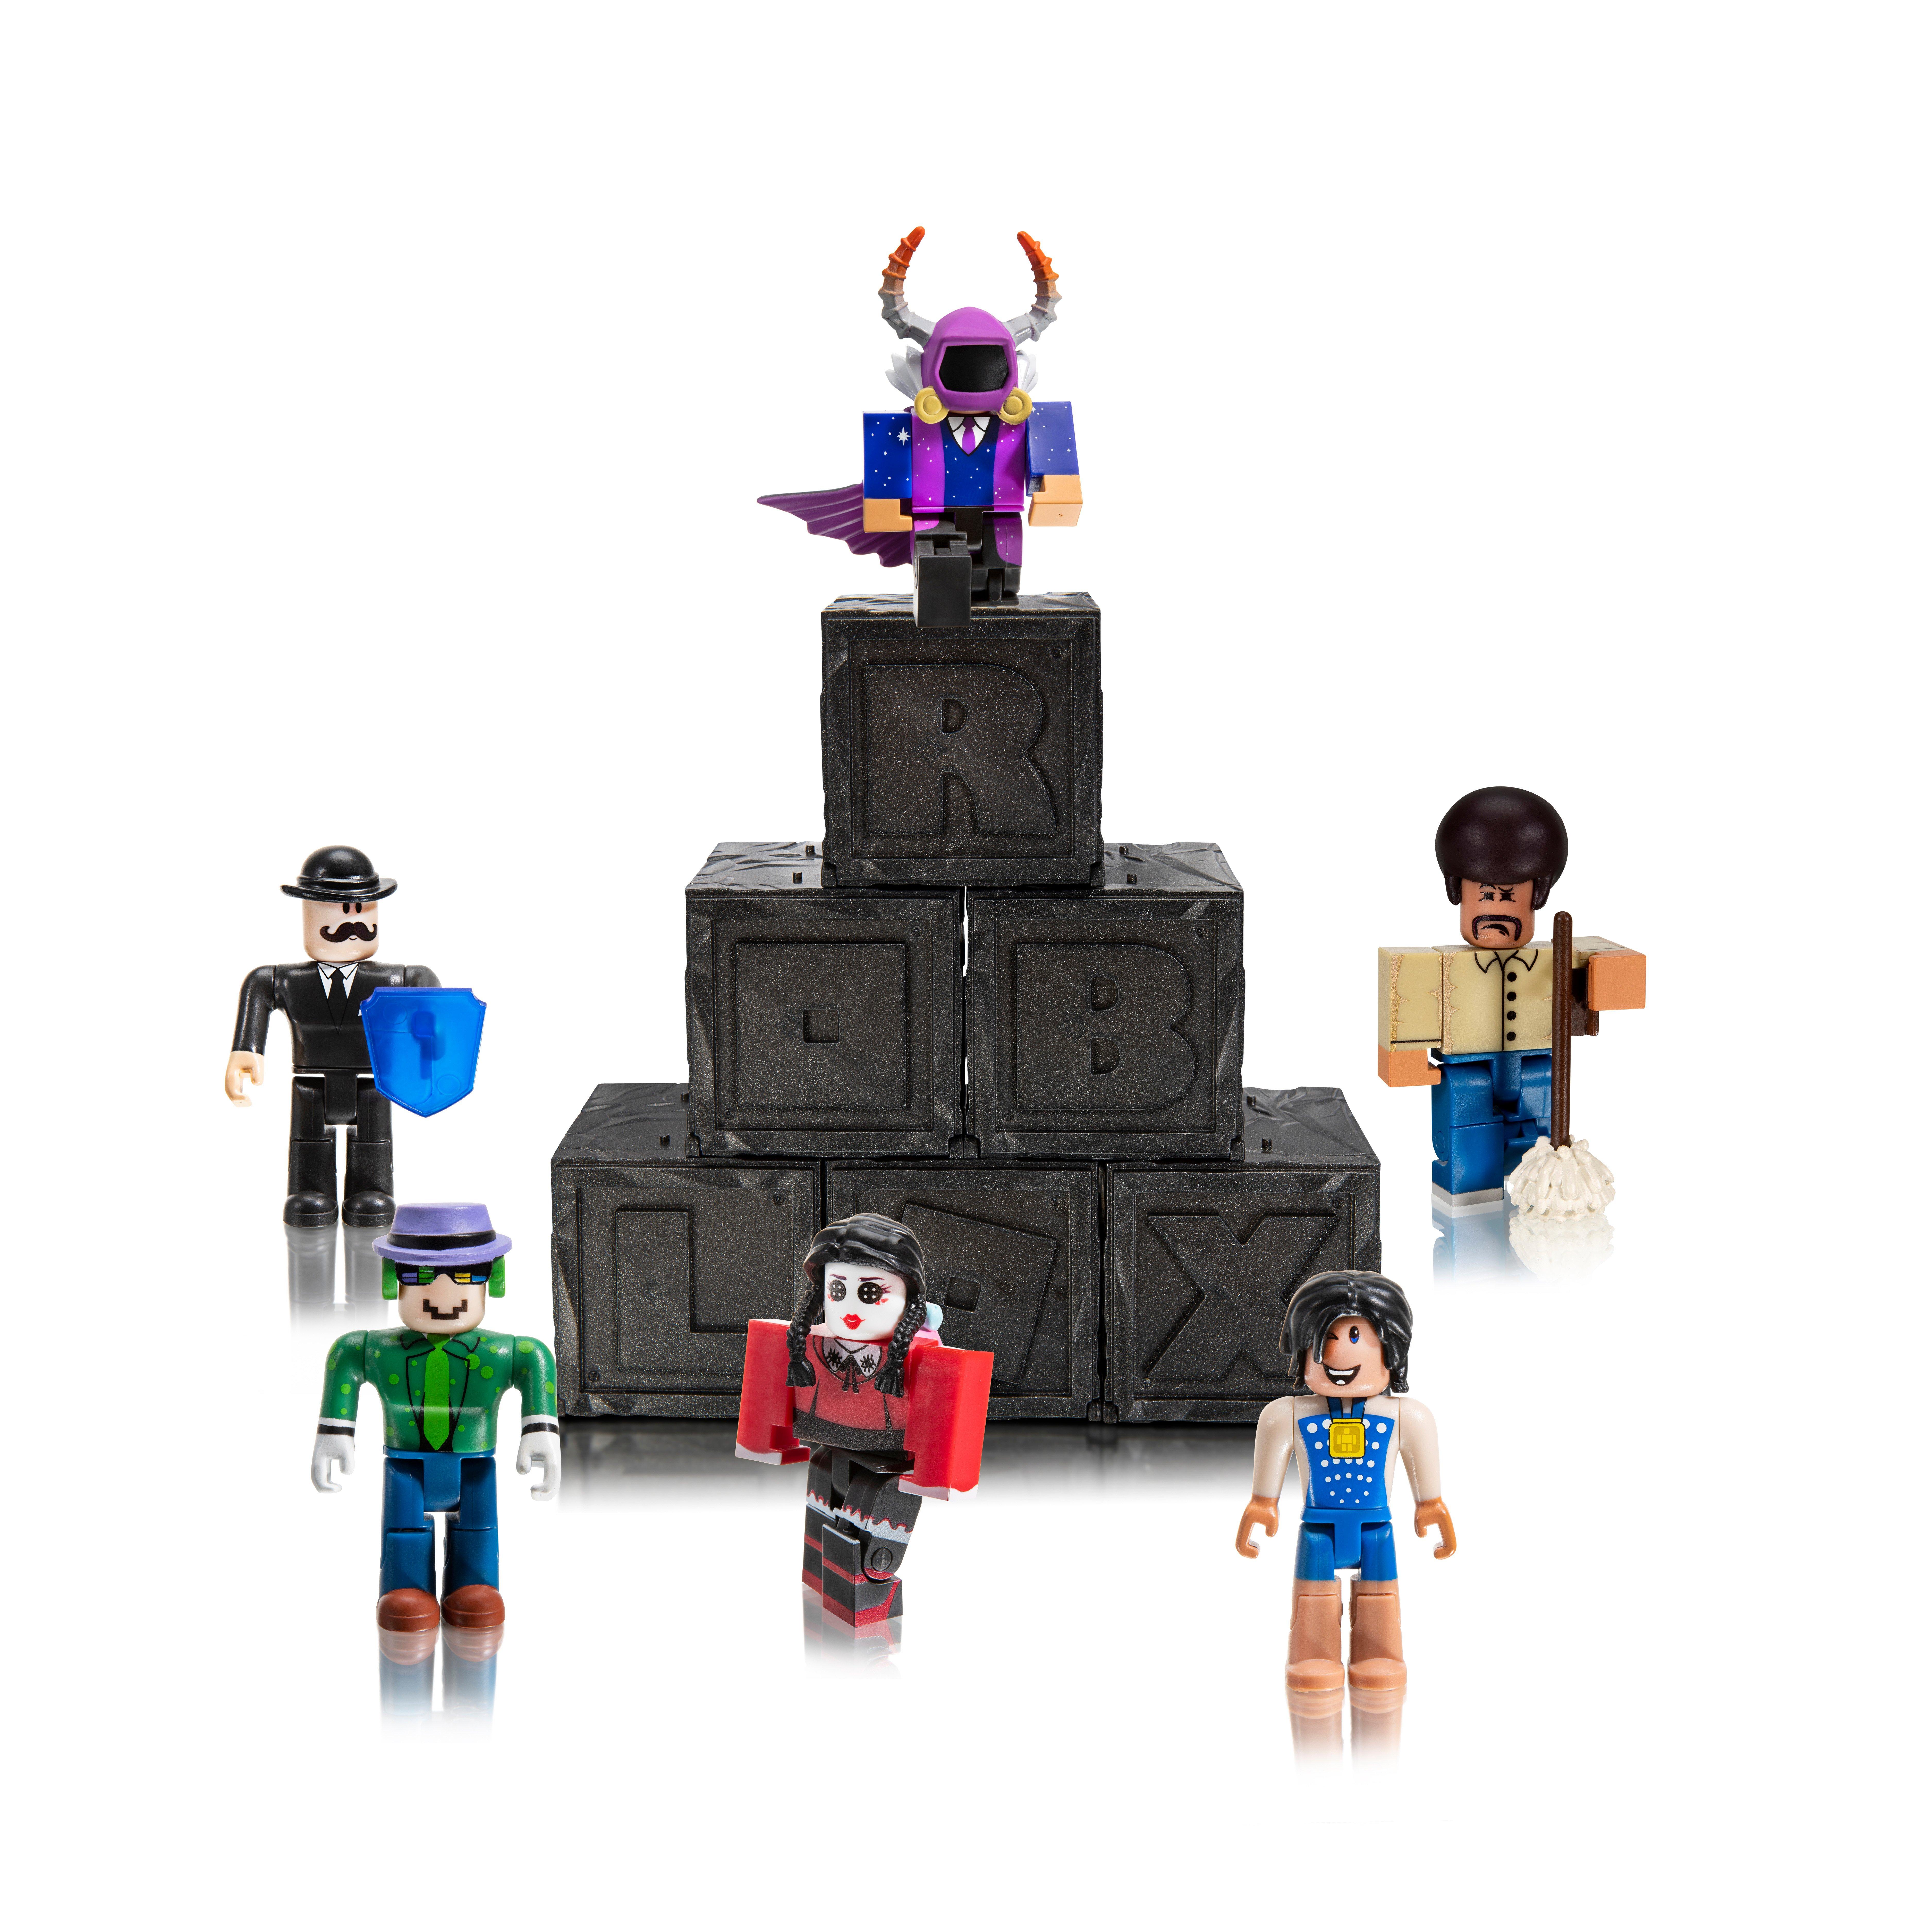 Roblox Action Collection Series 7 Mystery Figure Includes 1 Figure And Exclusive Virtual Item Gamestop - roblox toys series 6 core packs